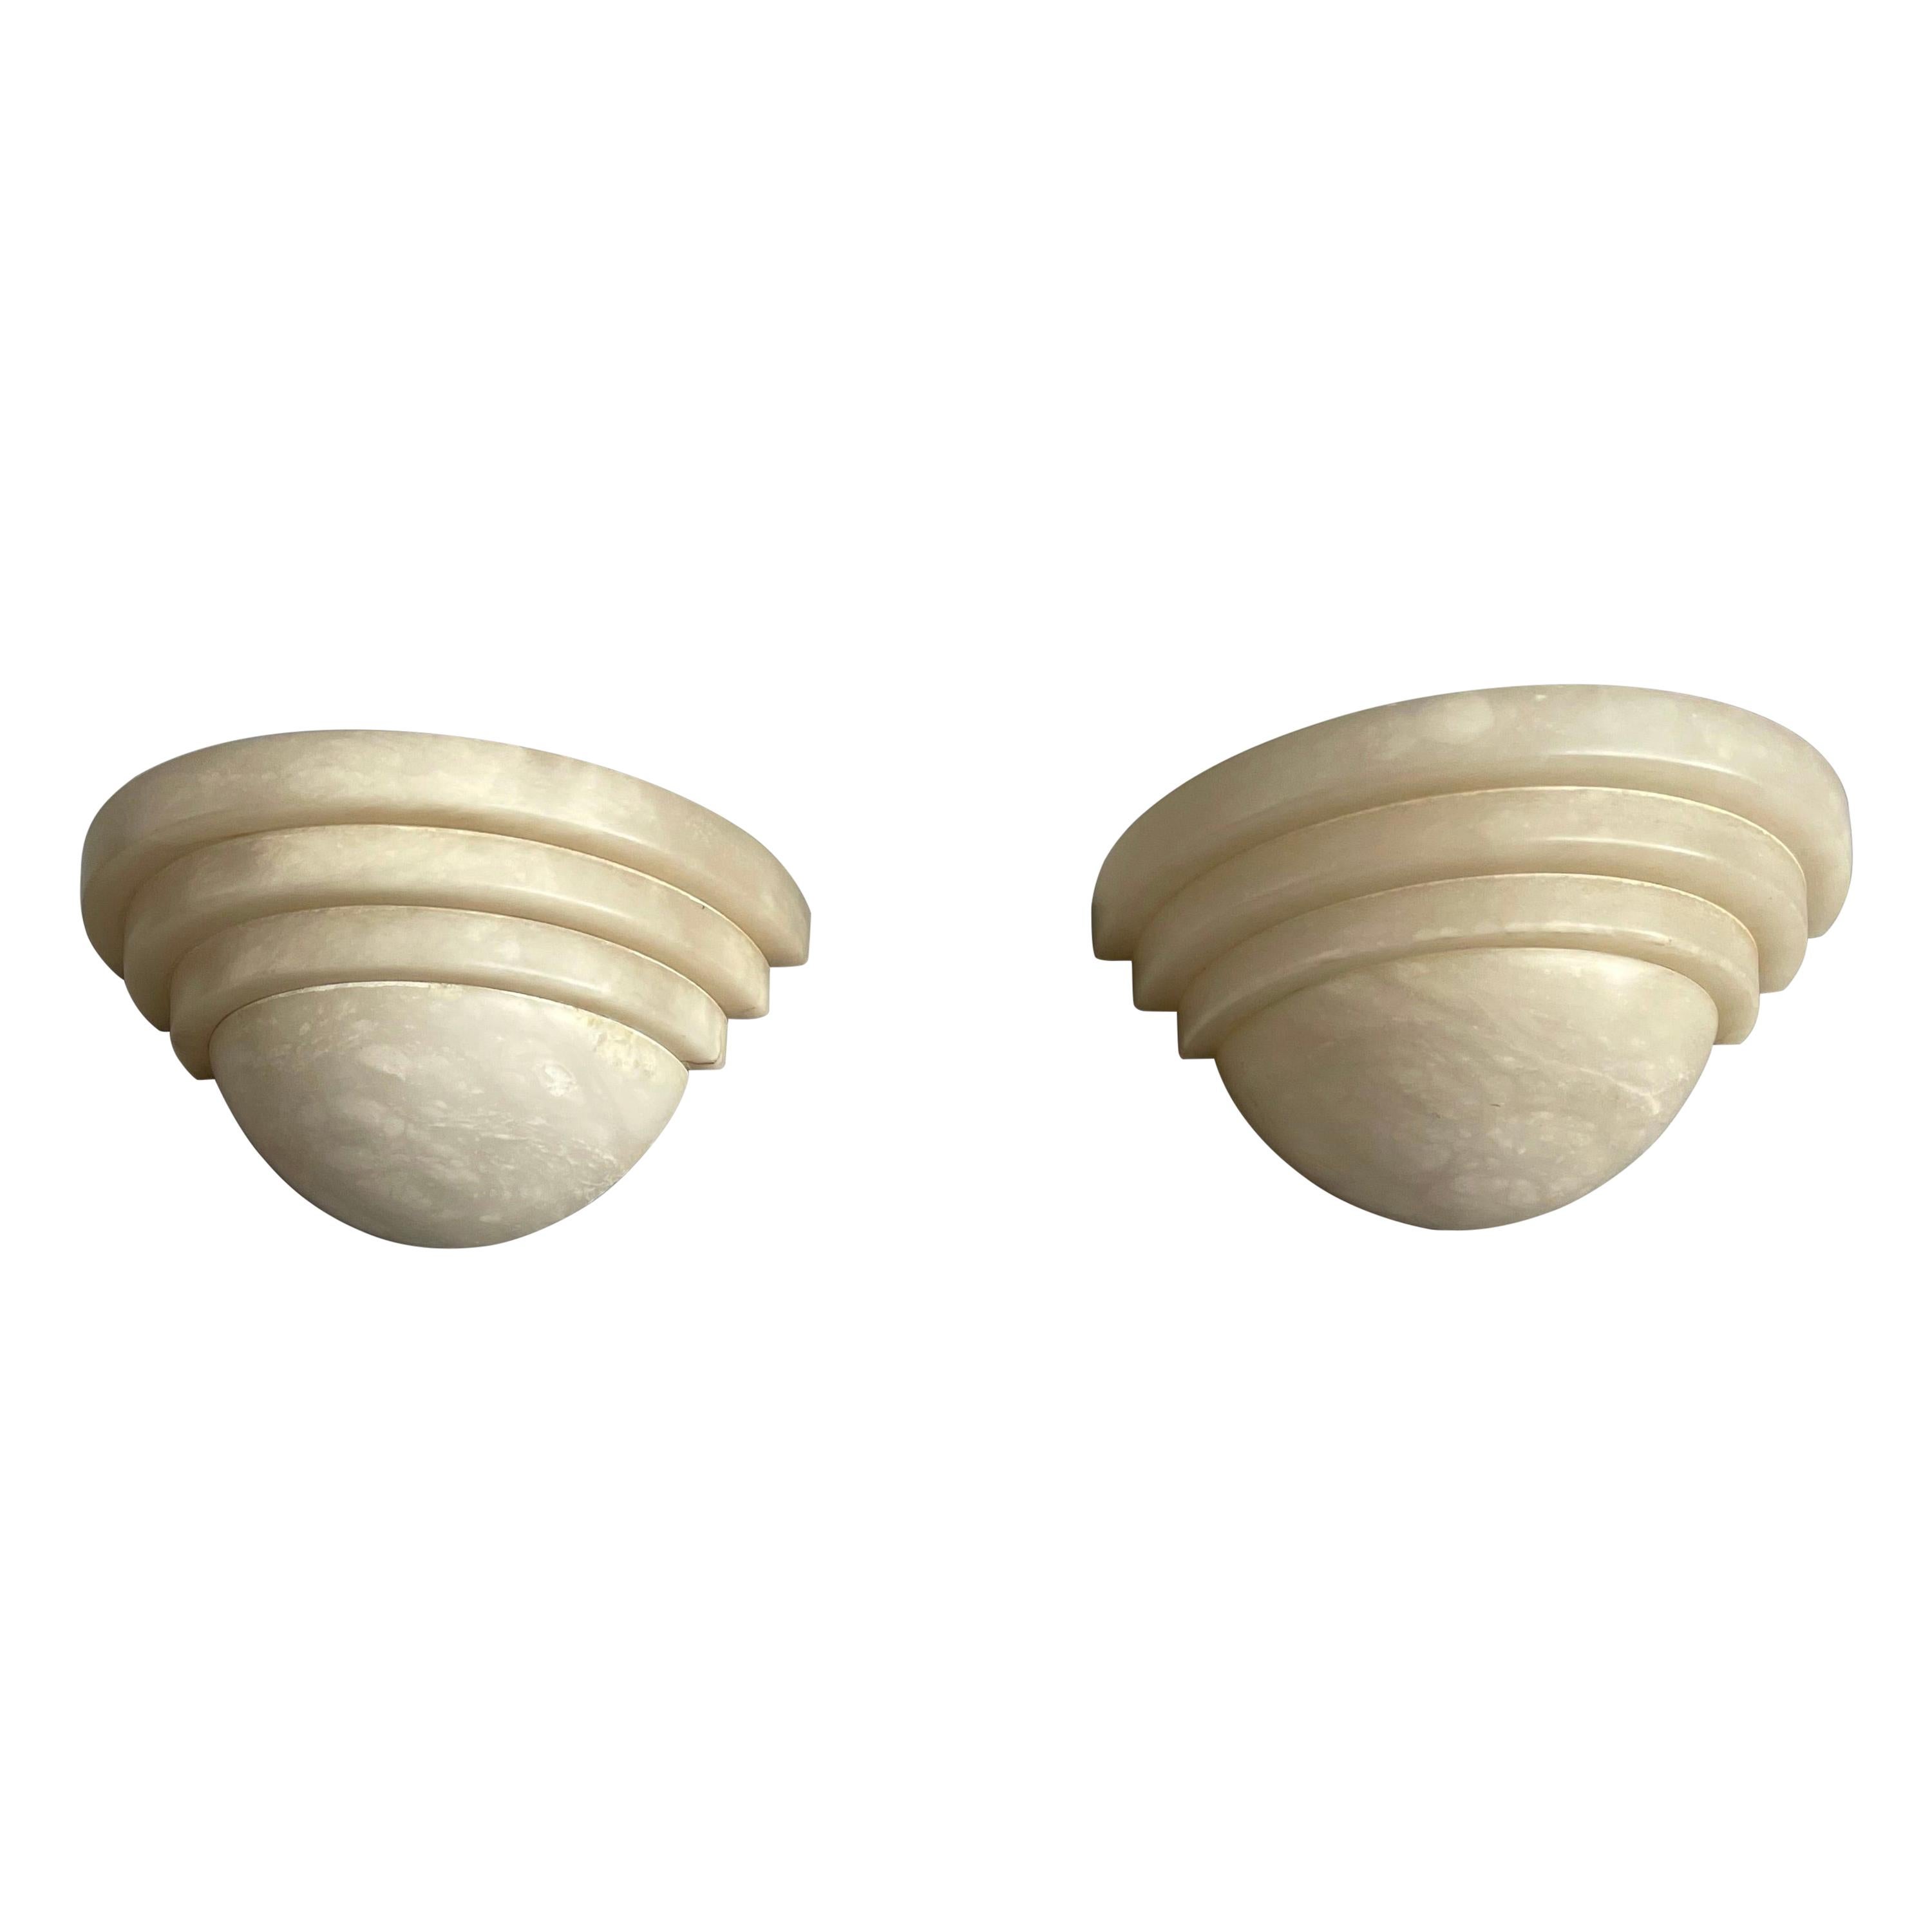 Exceptional Shape Midcentury Era Large Pair Alabaster Wall Sconces Lamps Lights  For Sale